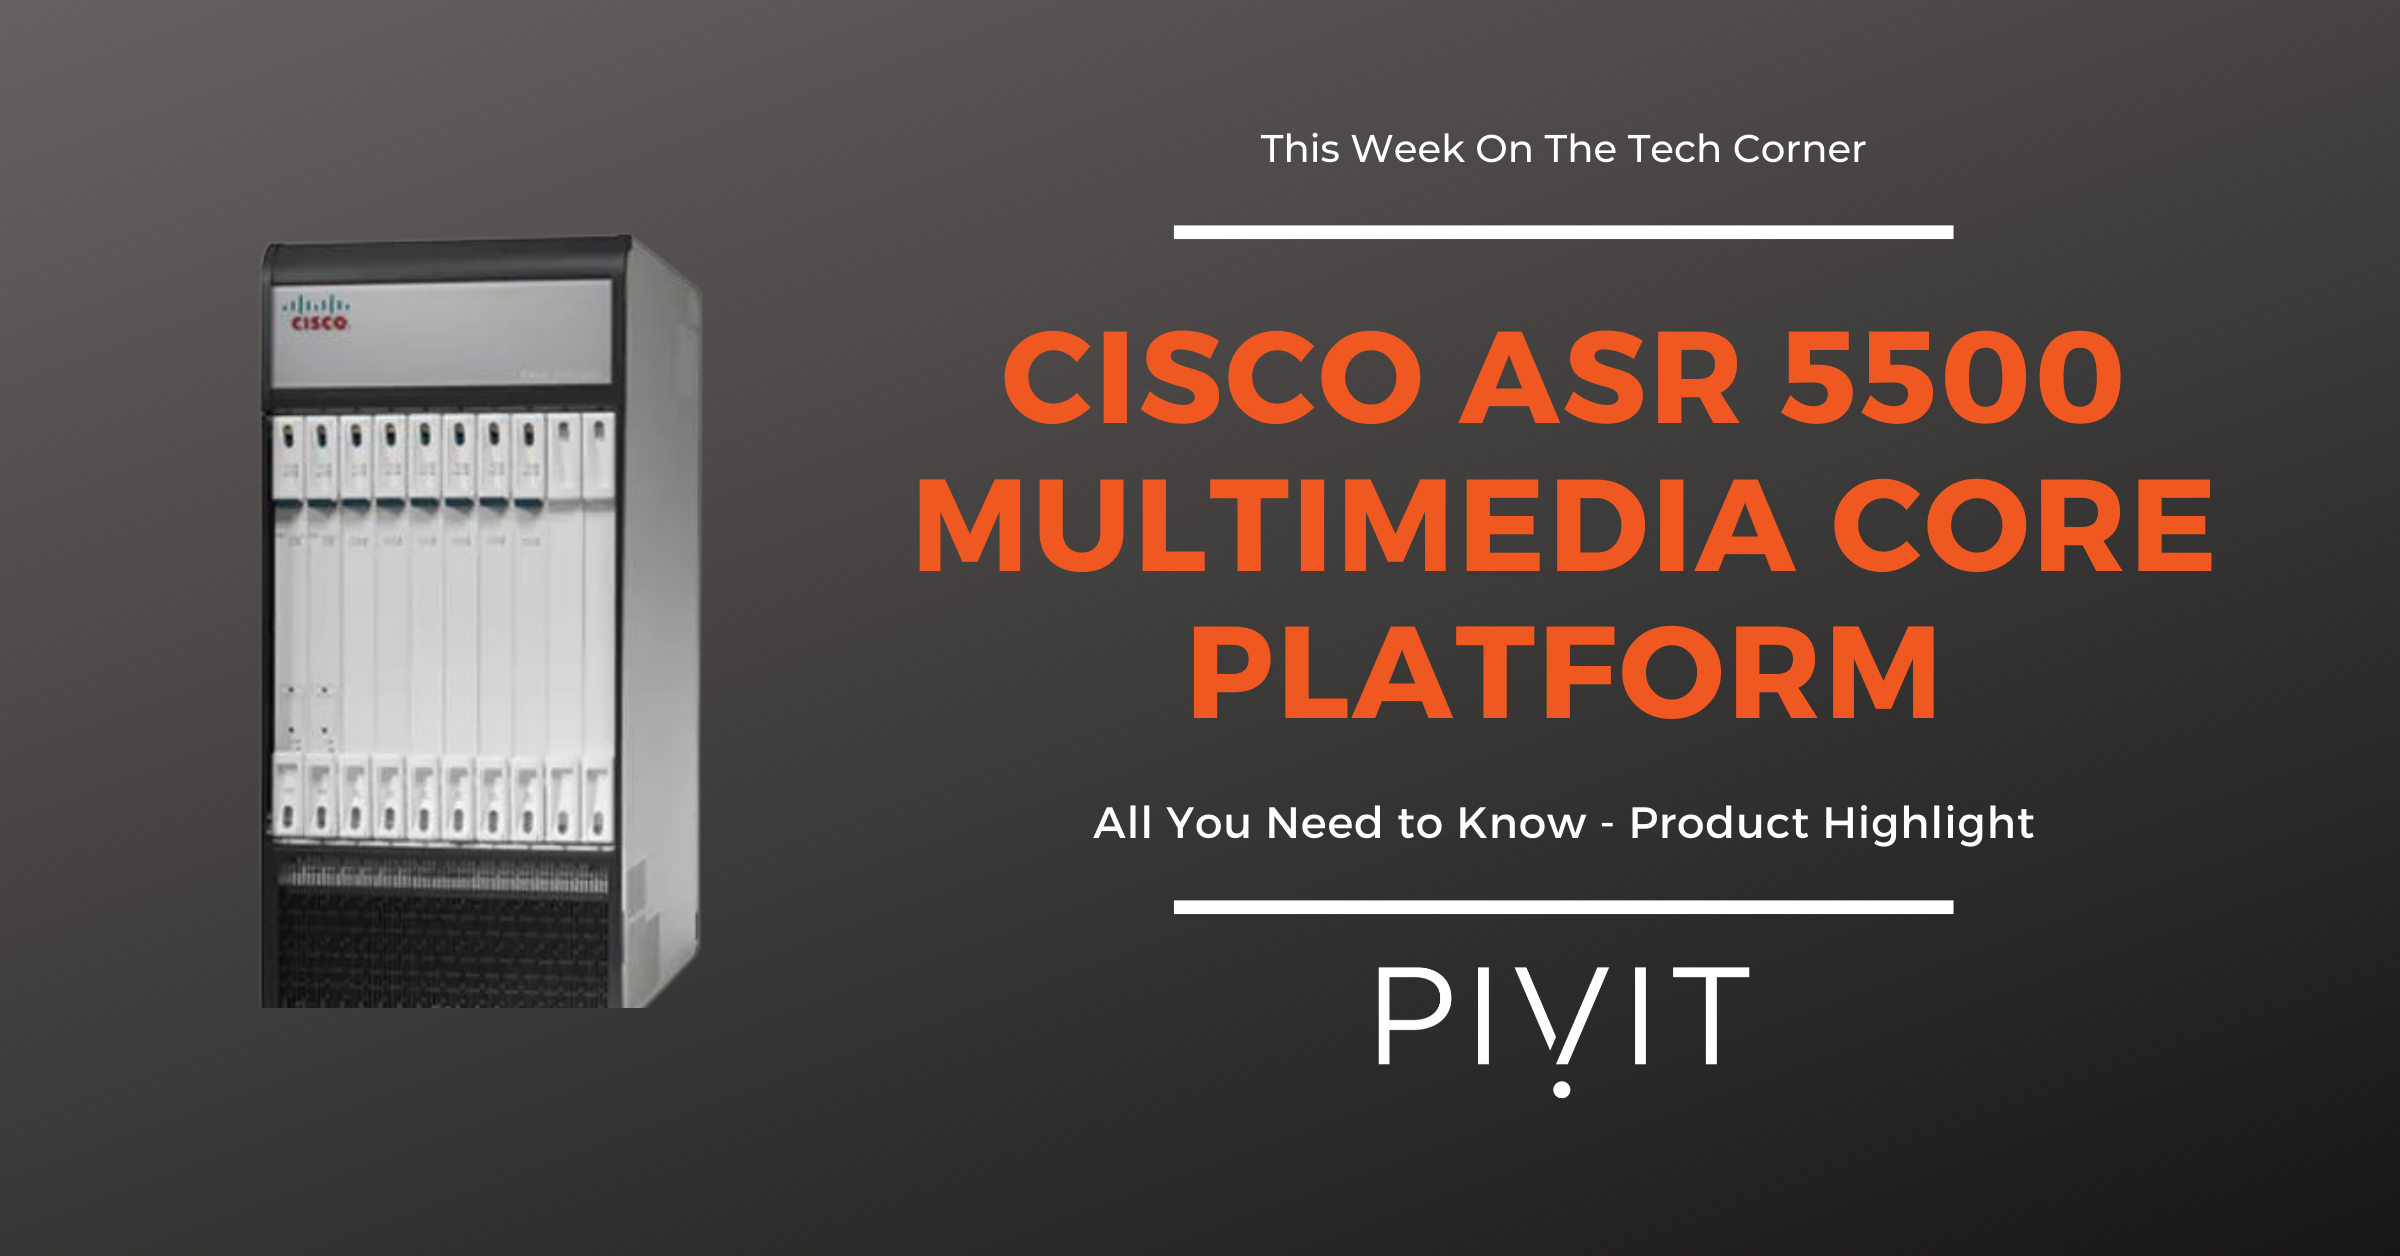 All You Need To Know - Cisco ASR 5500 Multimedia Core Platform Product Review